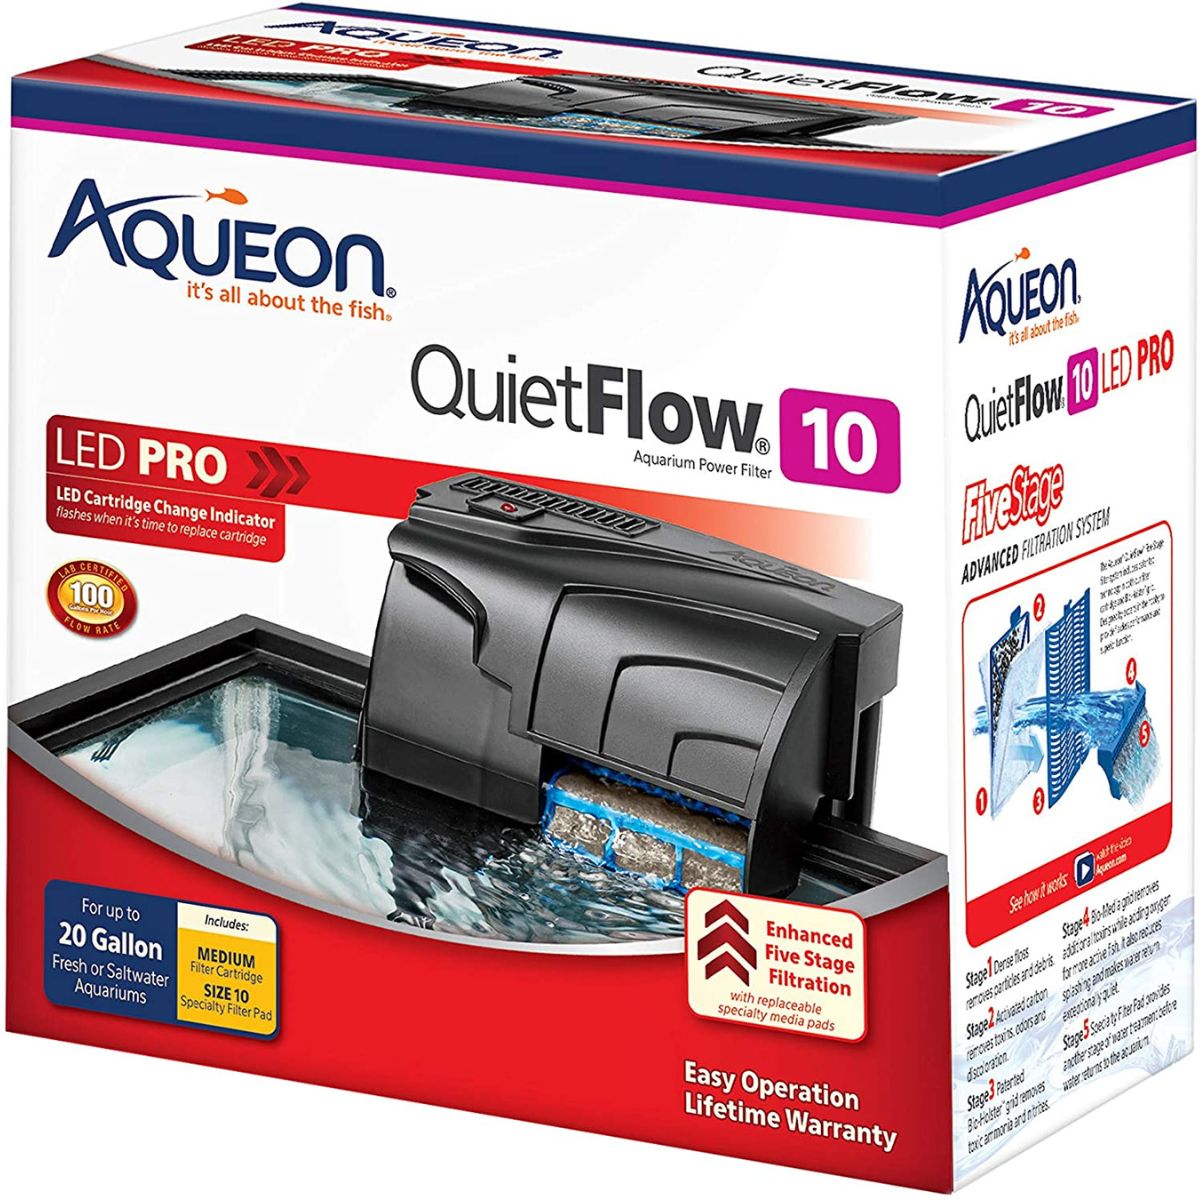 The Best Filters for 5 Gallon Tank Options: Aqueon QuietFlow LED PRO